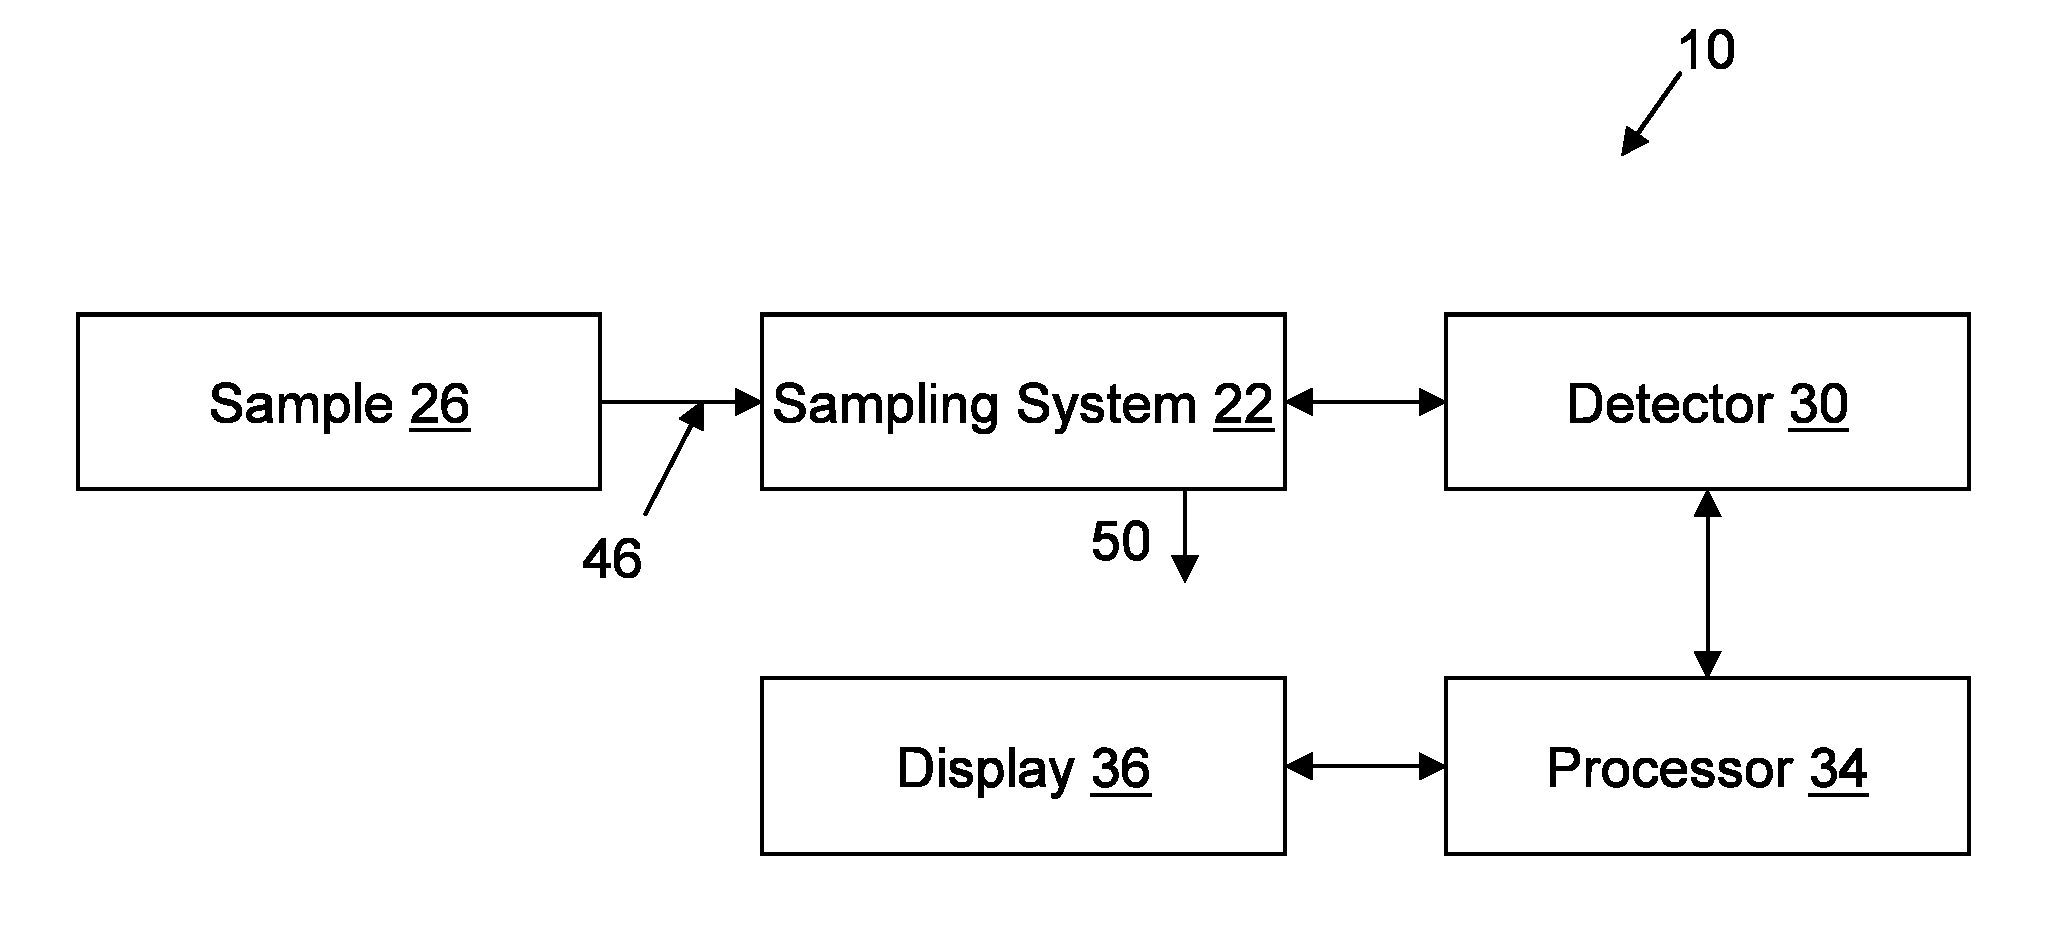 Monitoring, detecting and quantifying chemical compounds in a sample